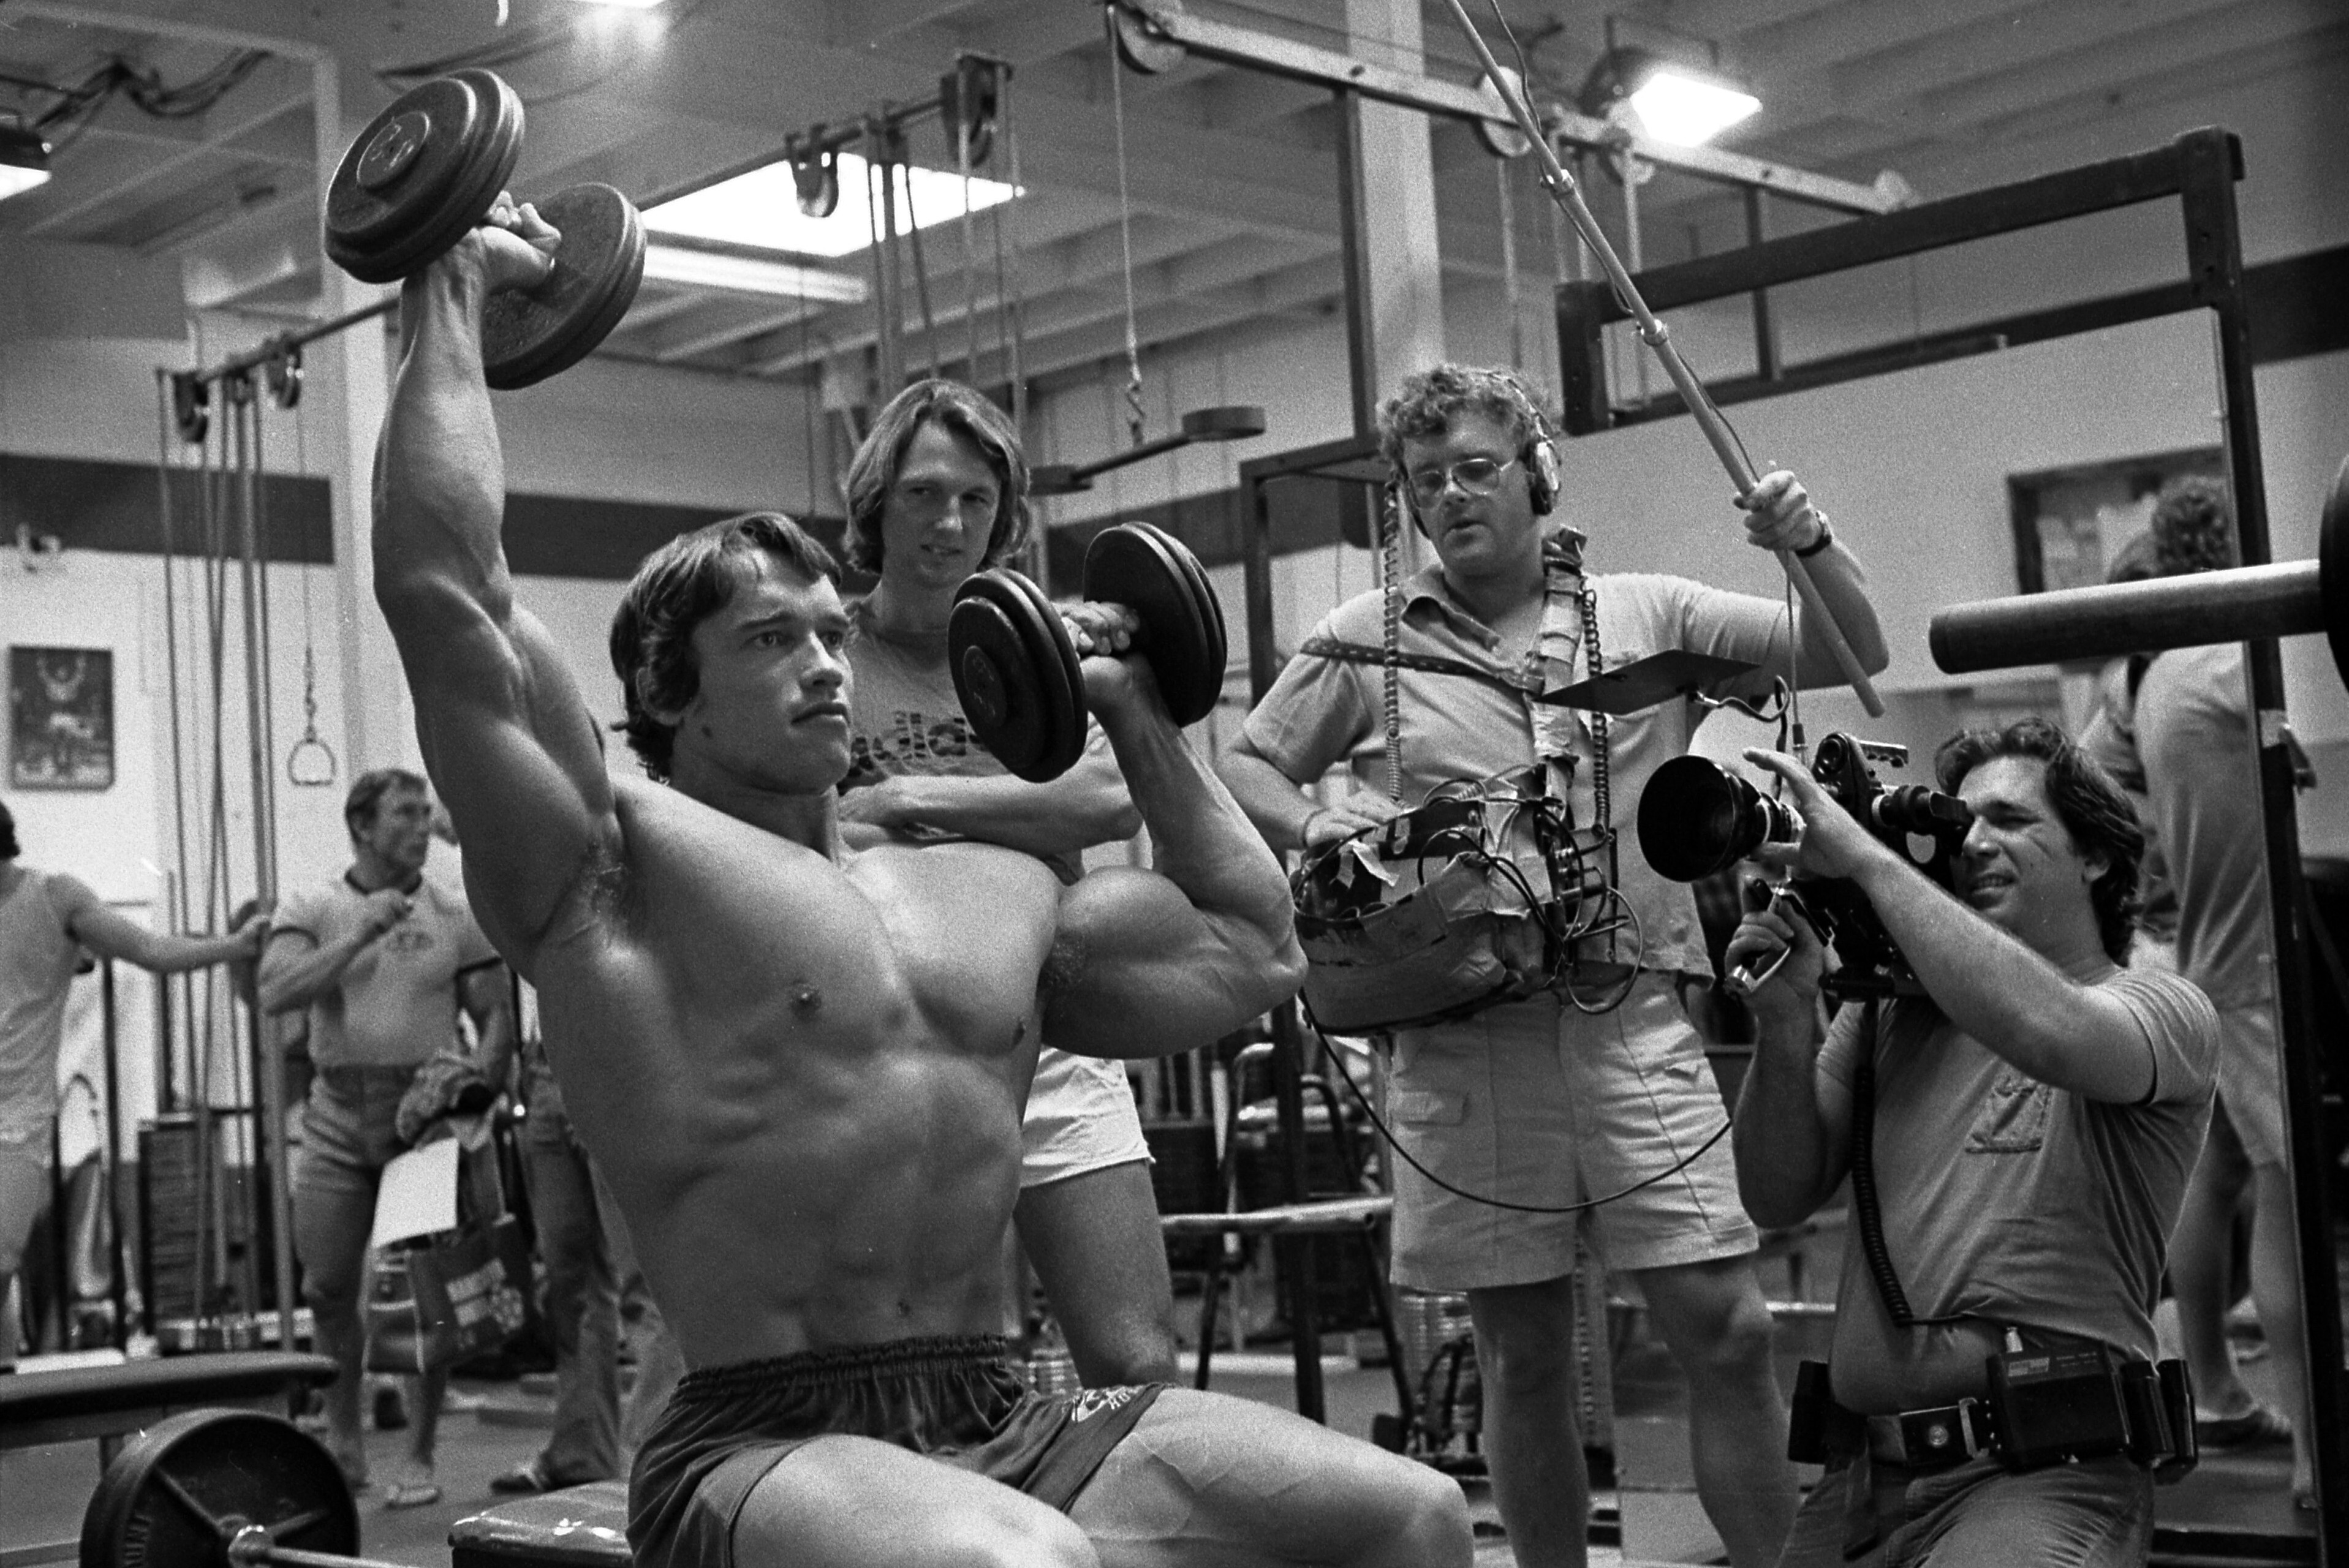 At the height of his Mr. Olympia title reign, Arnold Schwarzenegger would’ve been considered obese according to his BMI.